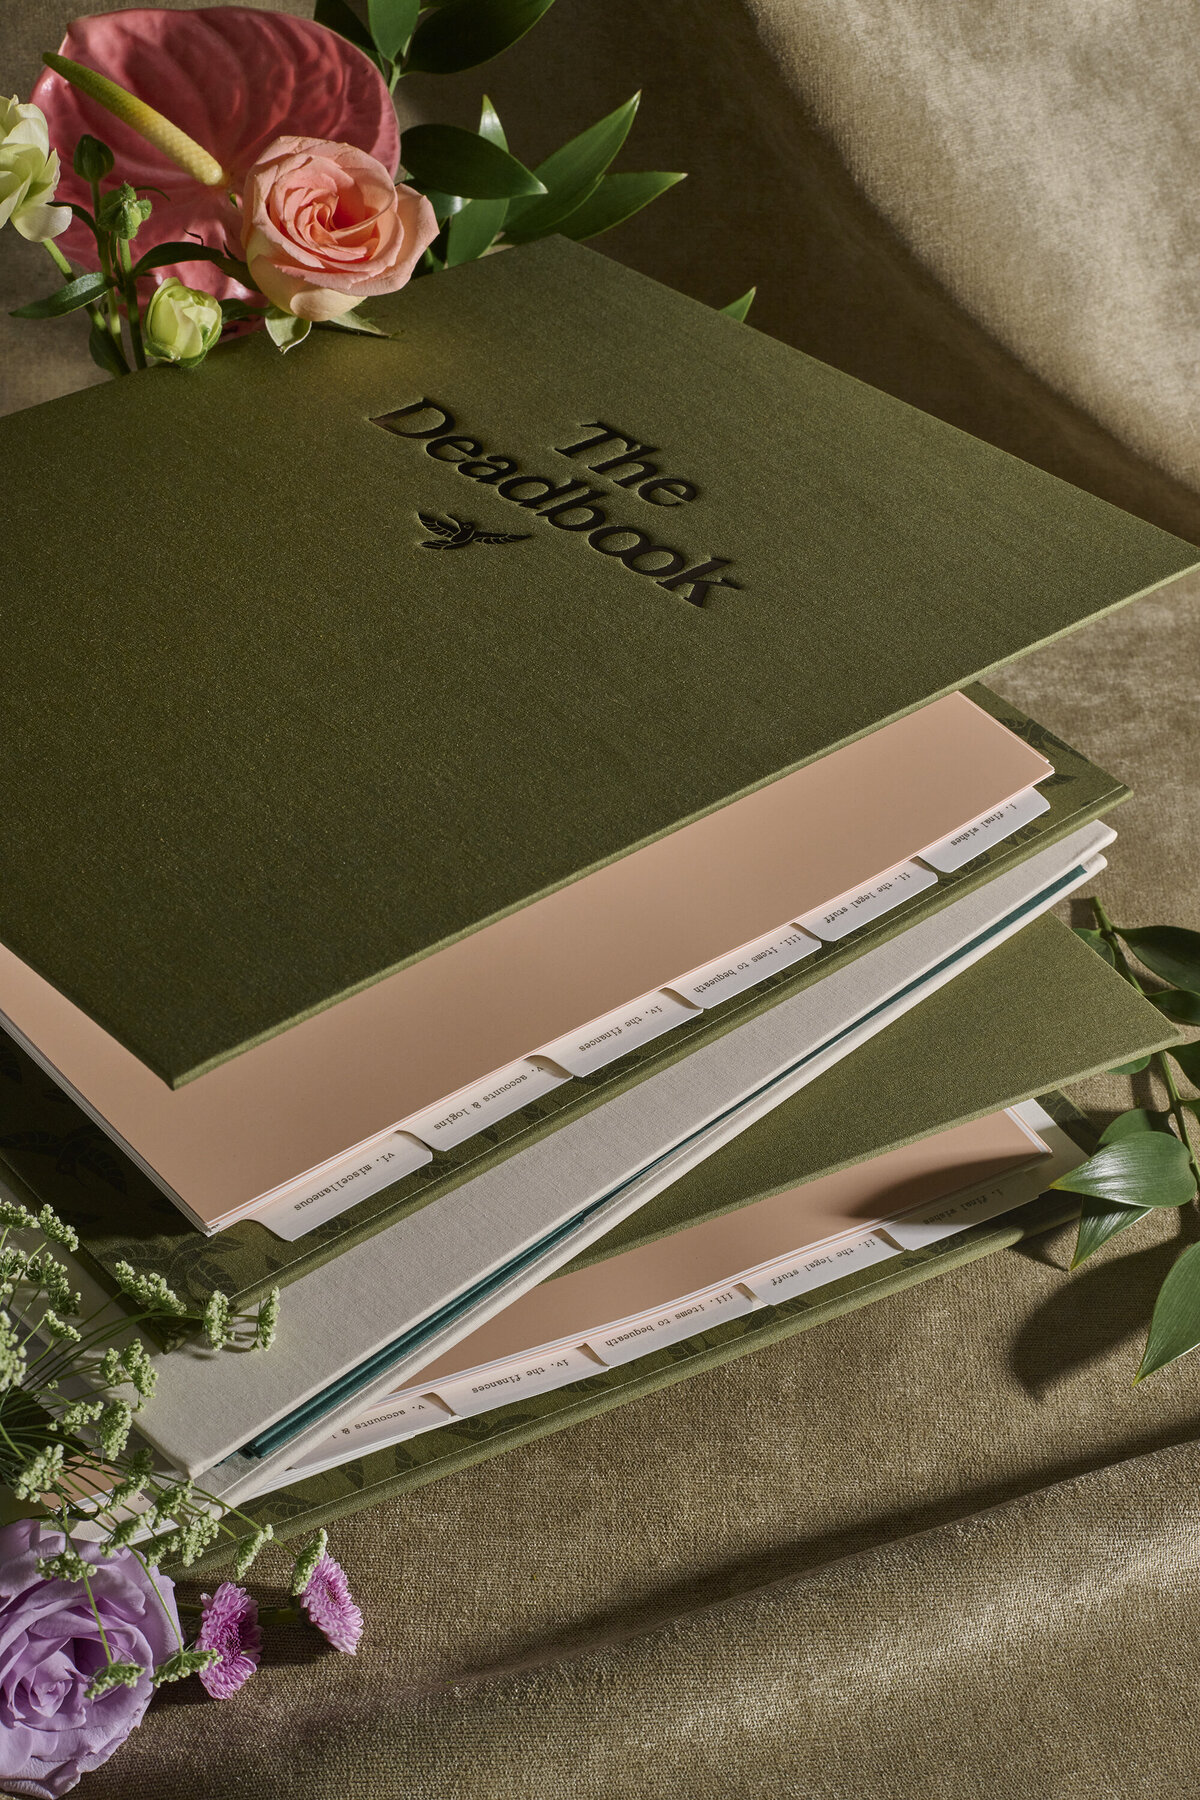 los-angeles-product-photographer-lindsay-kreighbaum-the-deadbook-floral-book-photography-4